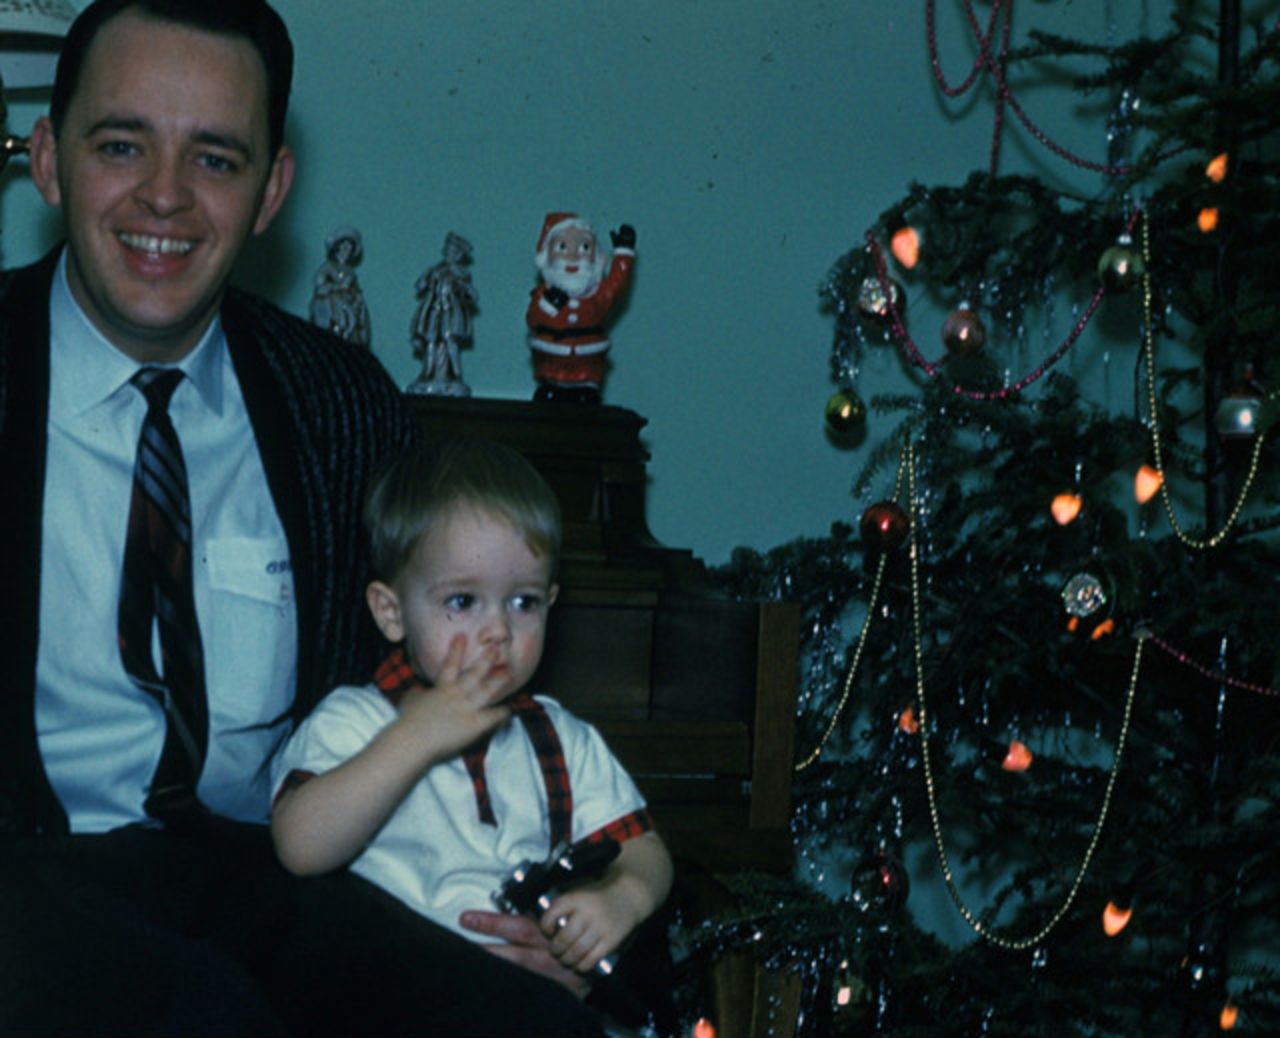 Andy, then about 4, with his father, the Rev. Charles Stanley, during Christmas. - (Courtesy of Charles Stanley)